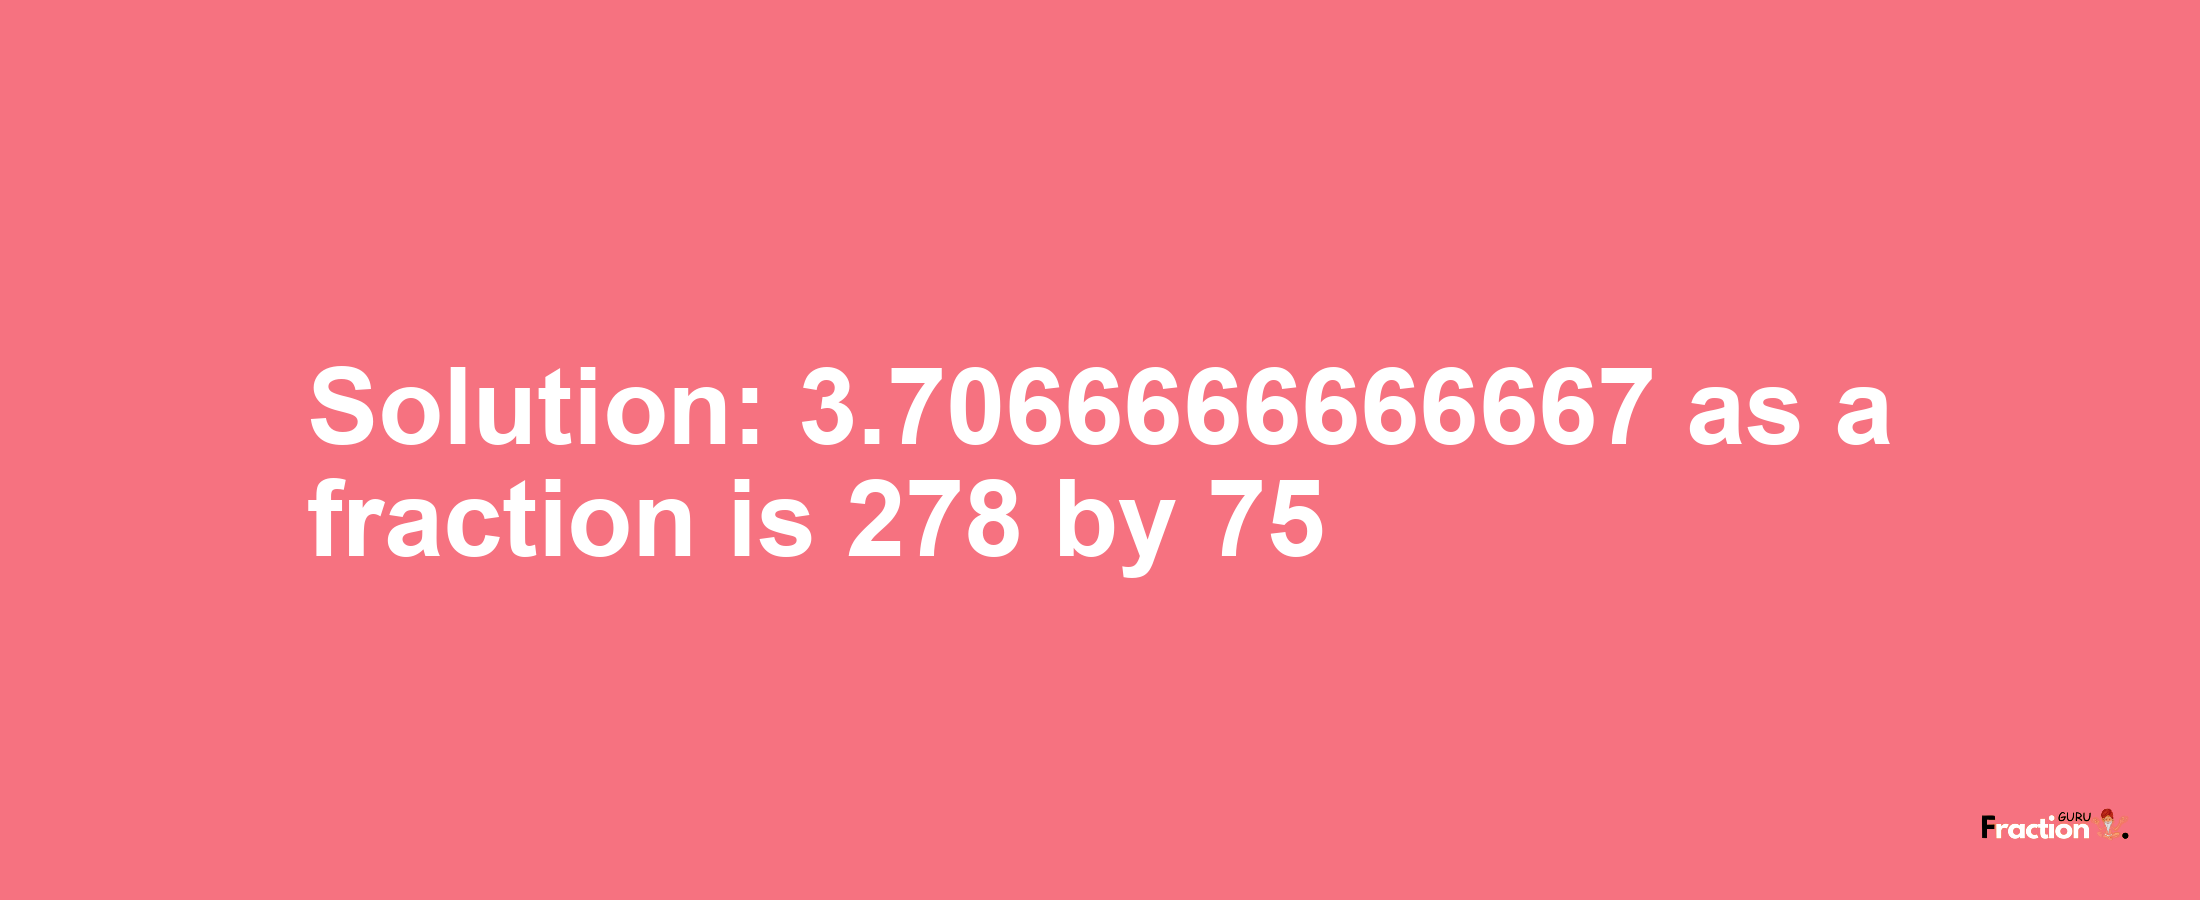 Solution:3.7066666666667 as a fraction is 278/75